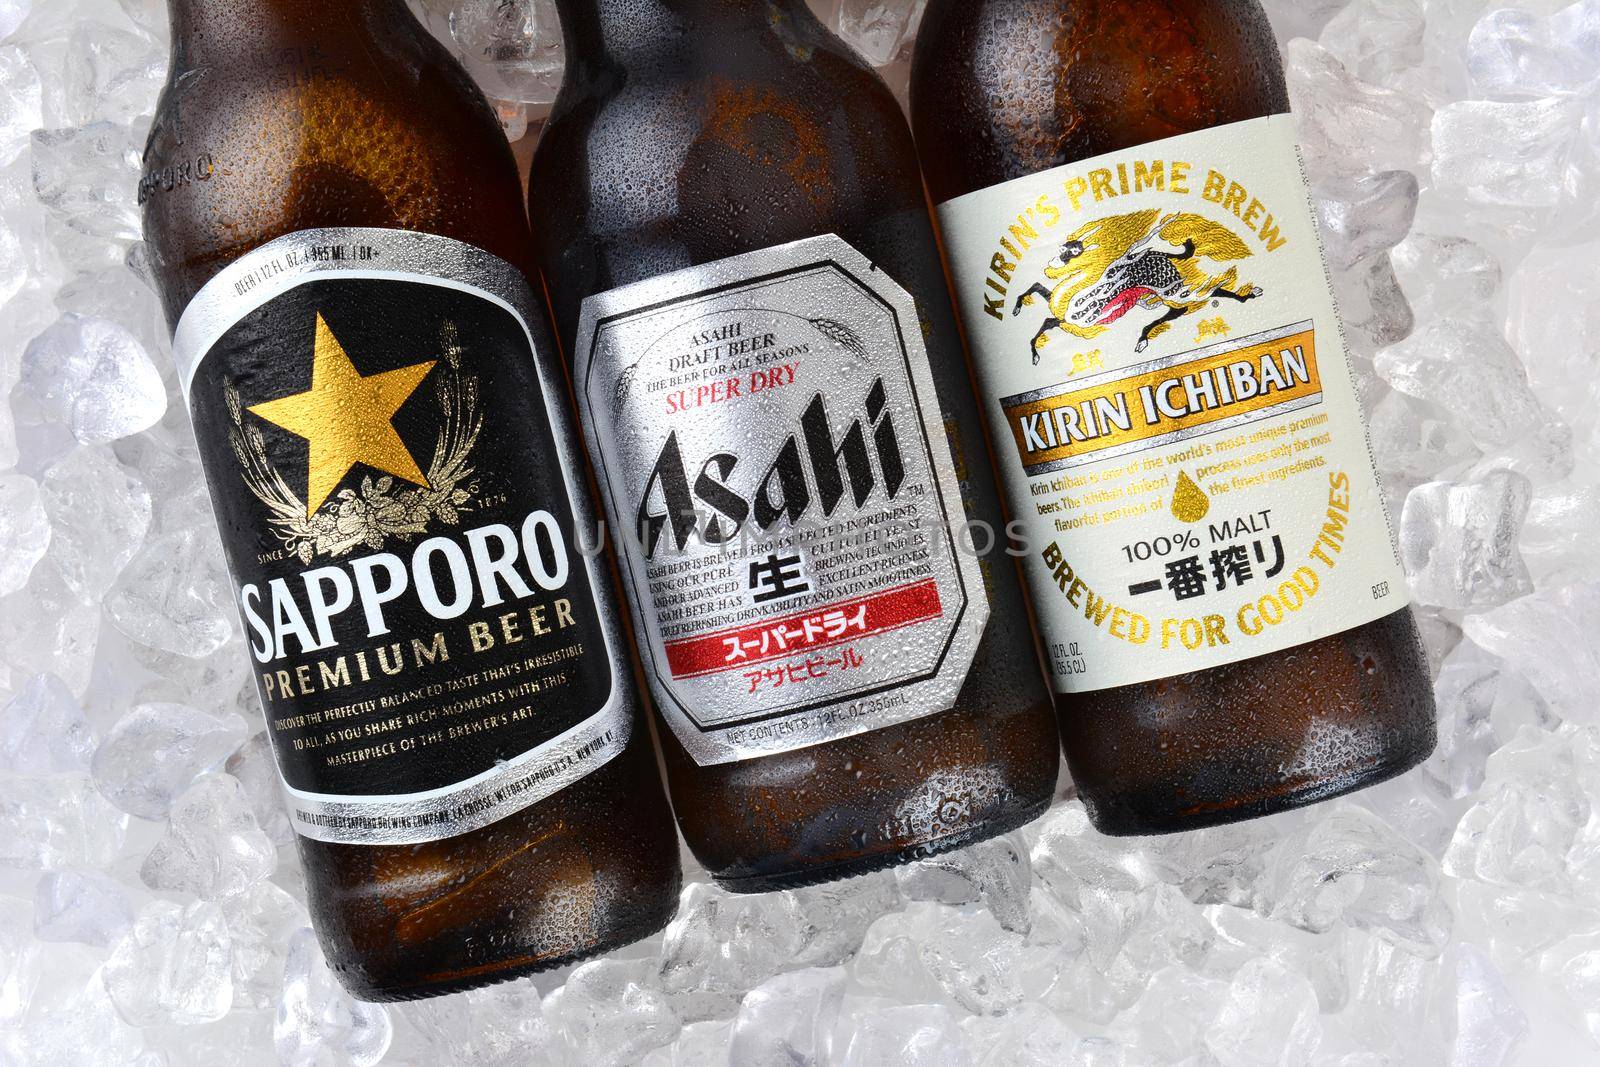 IRVINE, CA - JANUARY 11, 2015: Three bottles of Japanese beers on a bed of ice. Sapporo, Asahi and Kirin Ichiban are three of the most popular Japanese beers imported into the USA